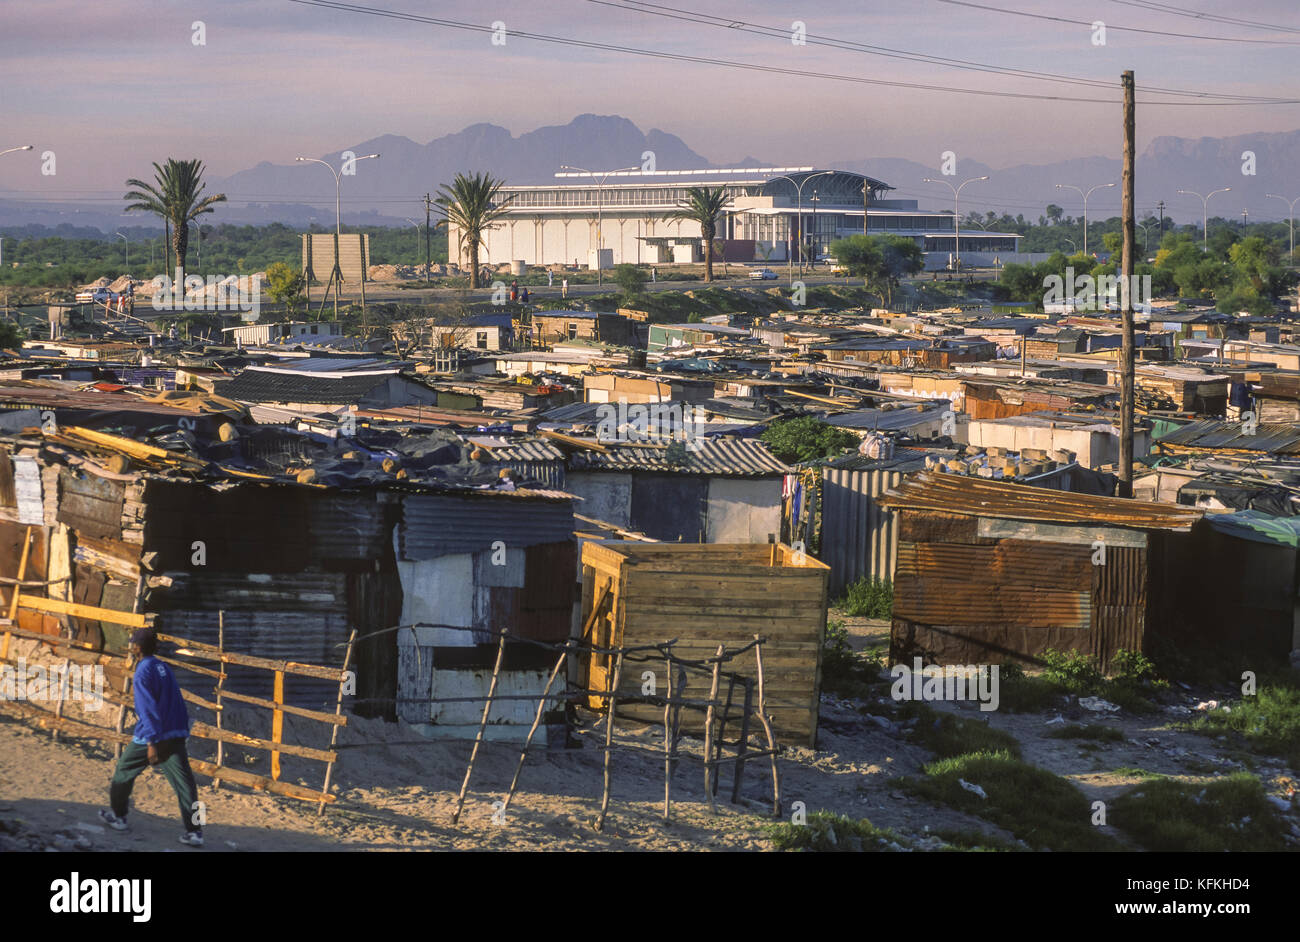 CAPETOWN, SOUTH AFRICA - Low income housing and poverty in Khayelitsha township. May 1999 Stock Photo